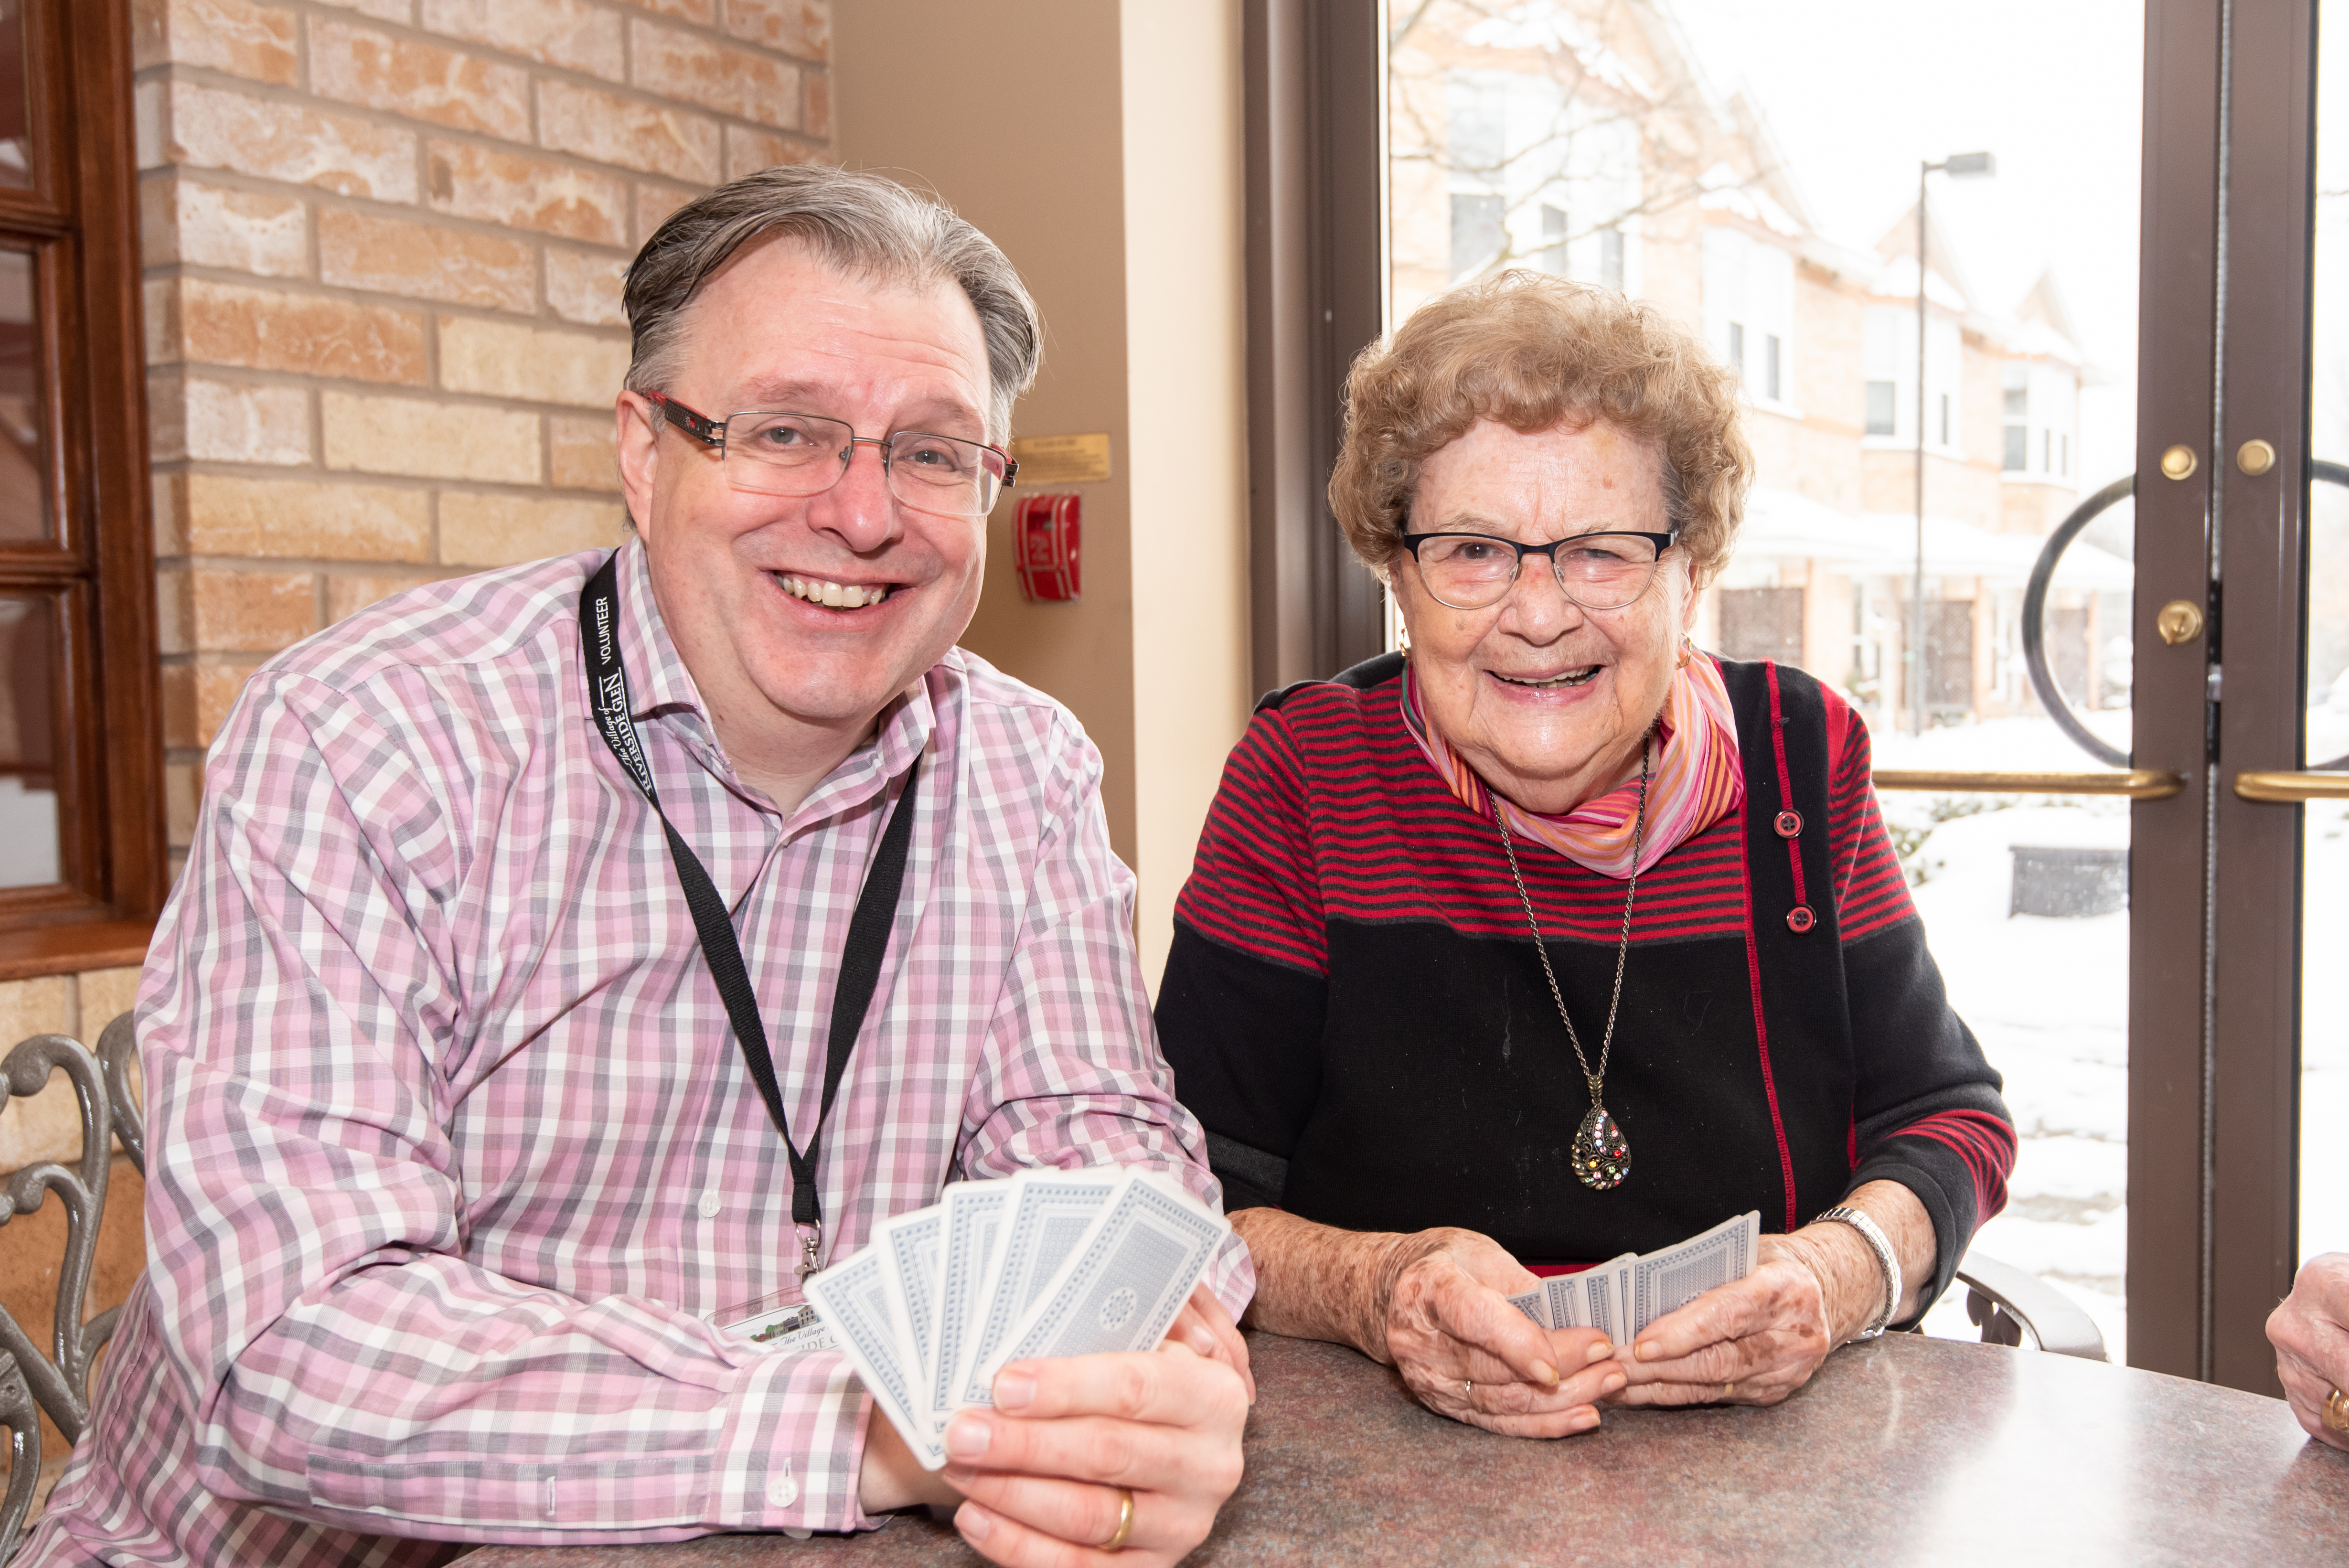 Volunteer and resident playing cards in the Cafe